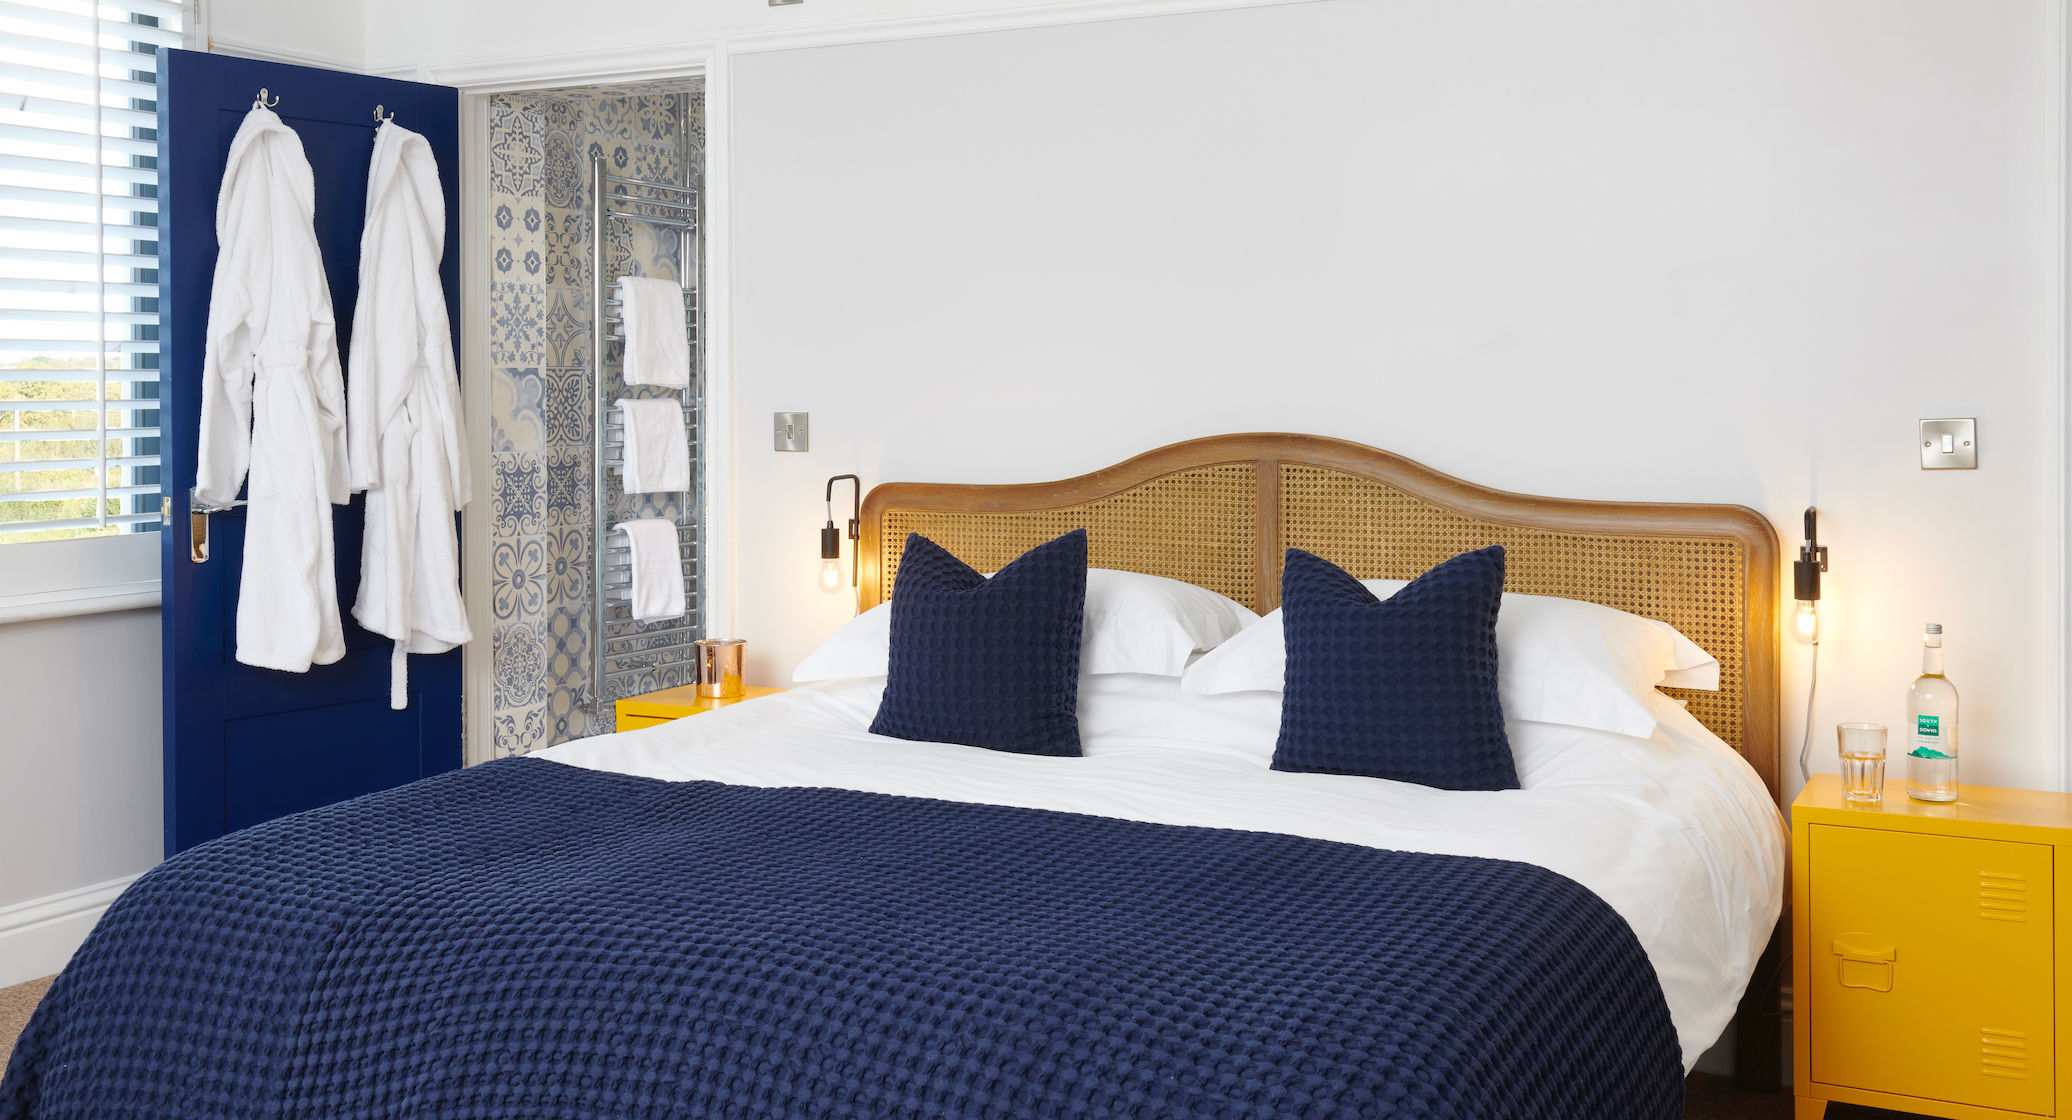 a bright airy bed and breakfast with white sheets on a double bed with navy blue throws and pillows